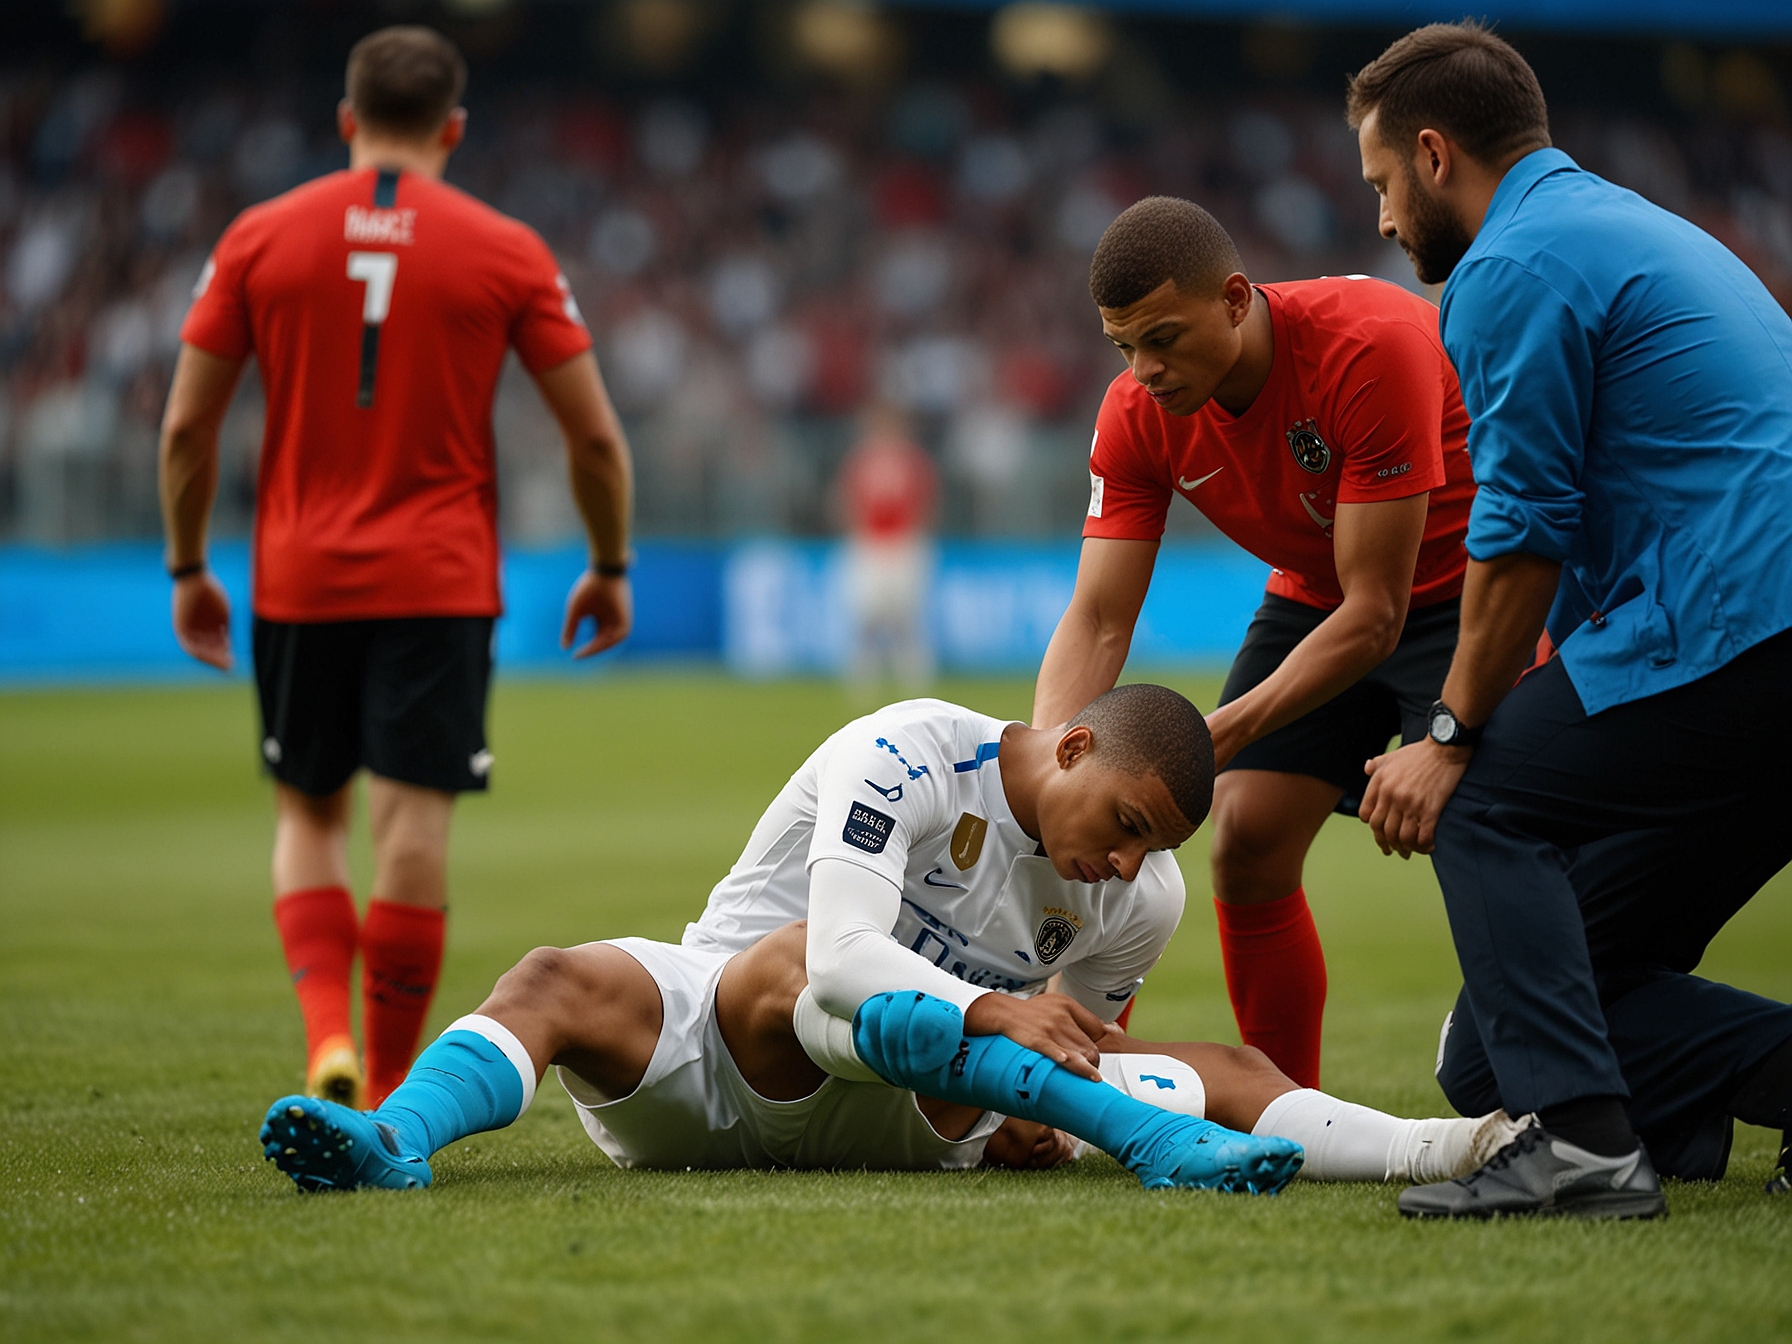 Kylian Mbappe receiving medical attention on the field after his unfortunate collision with Austria’s Maximilian Woeber, showing evident pain and concern from team medics.